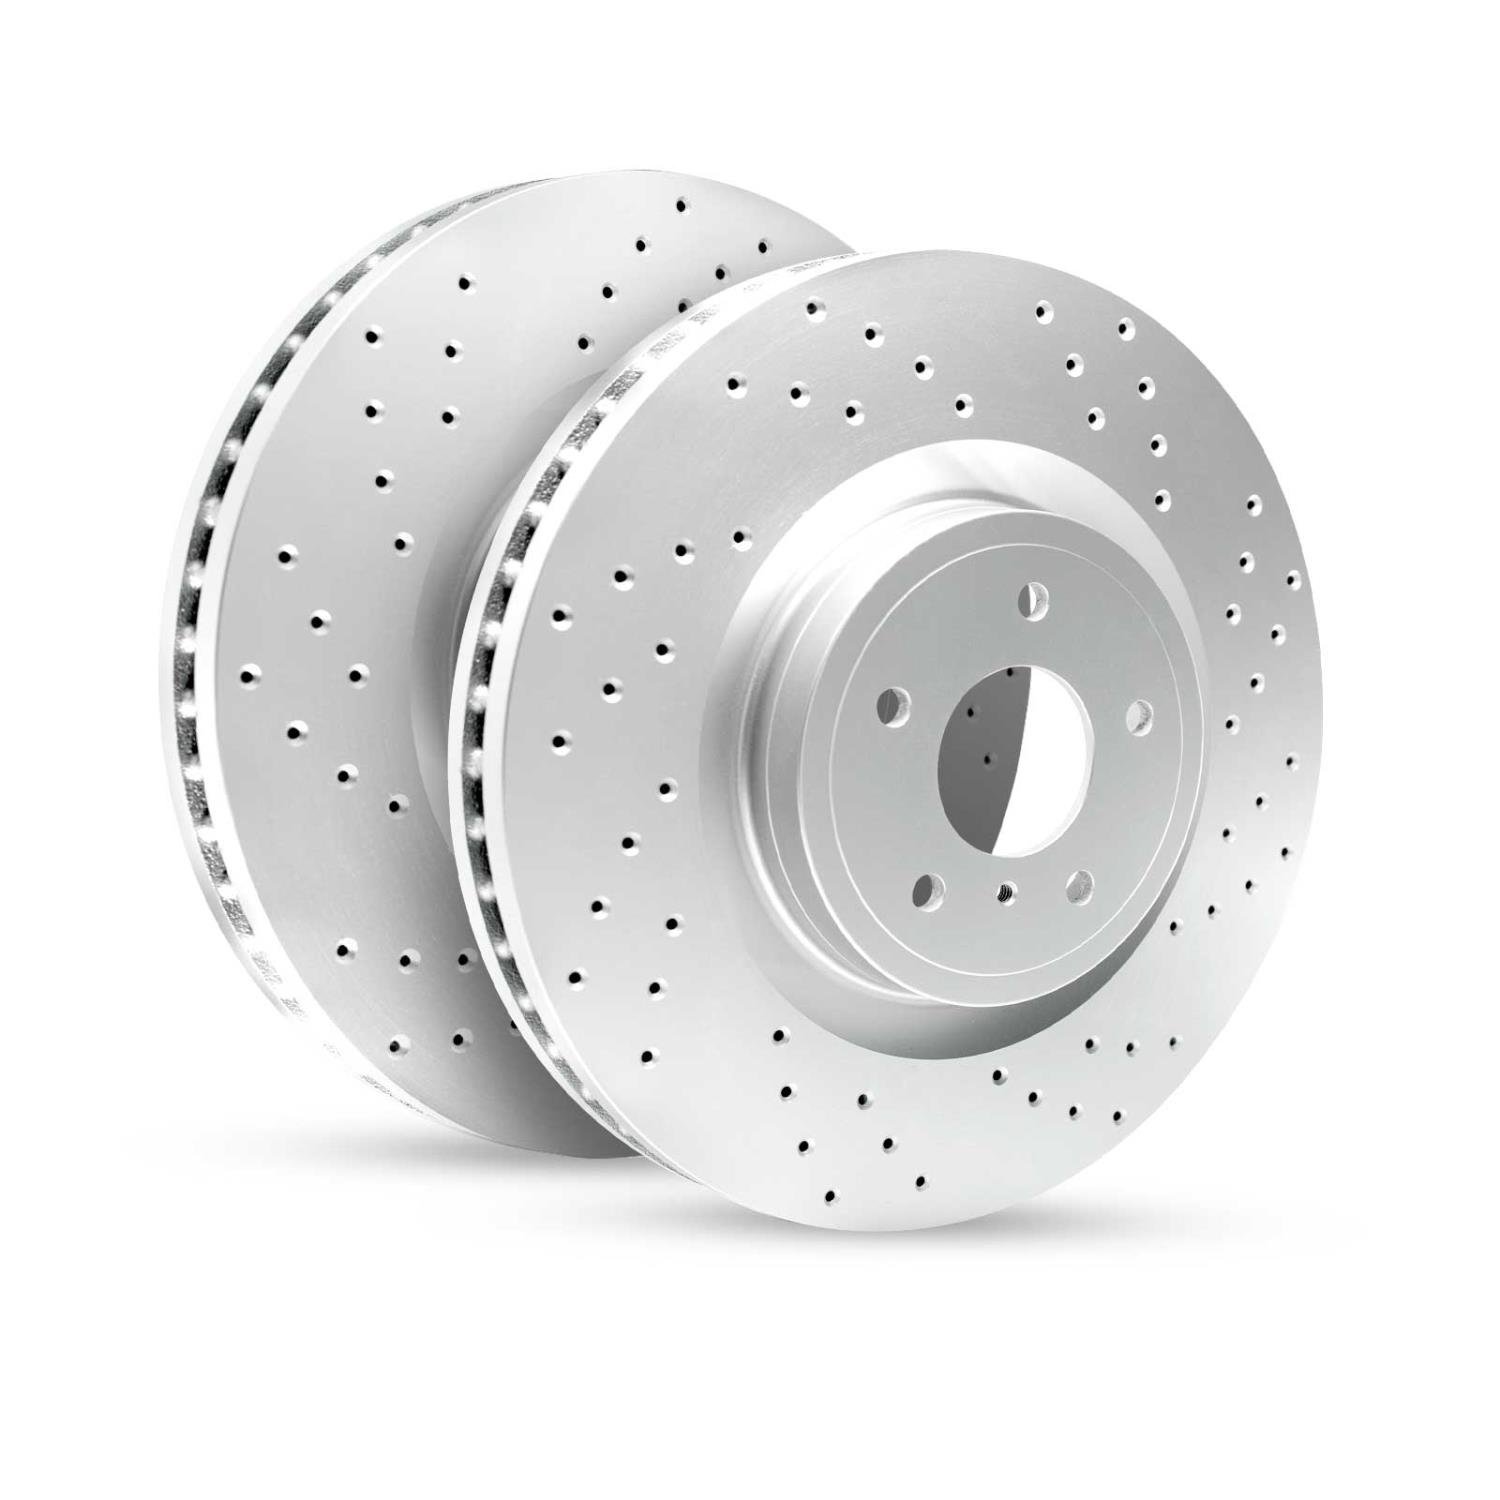 GEO-Carbon Drilled/Slotted Rotors, 2001-2008 Fits Multiple Makes/Models, Position: Rear